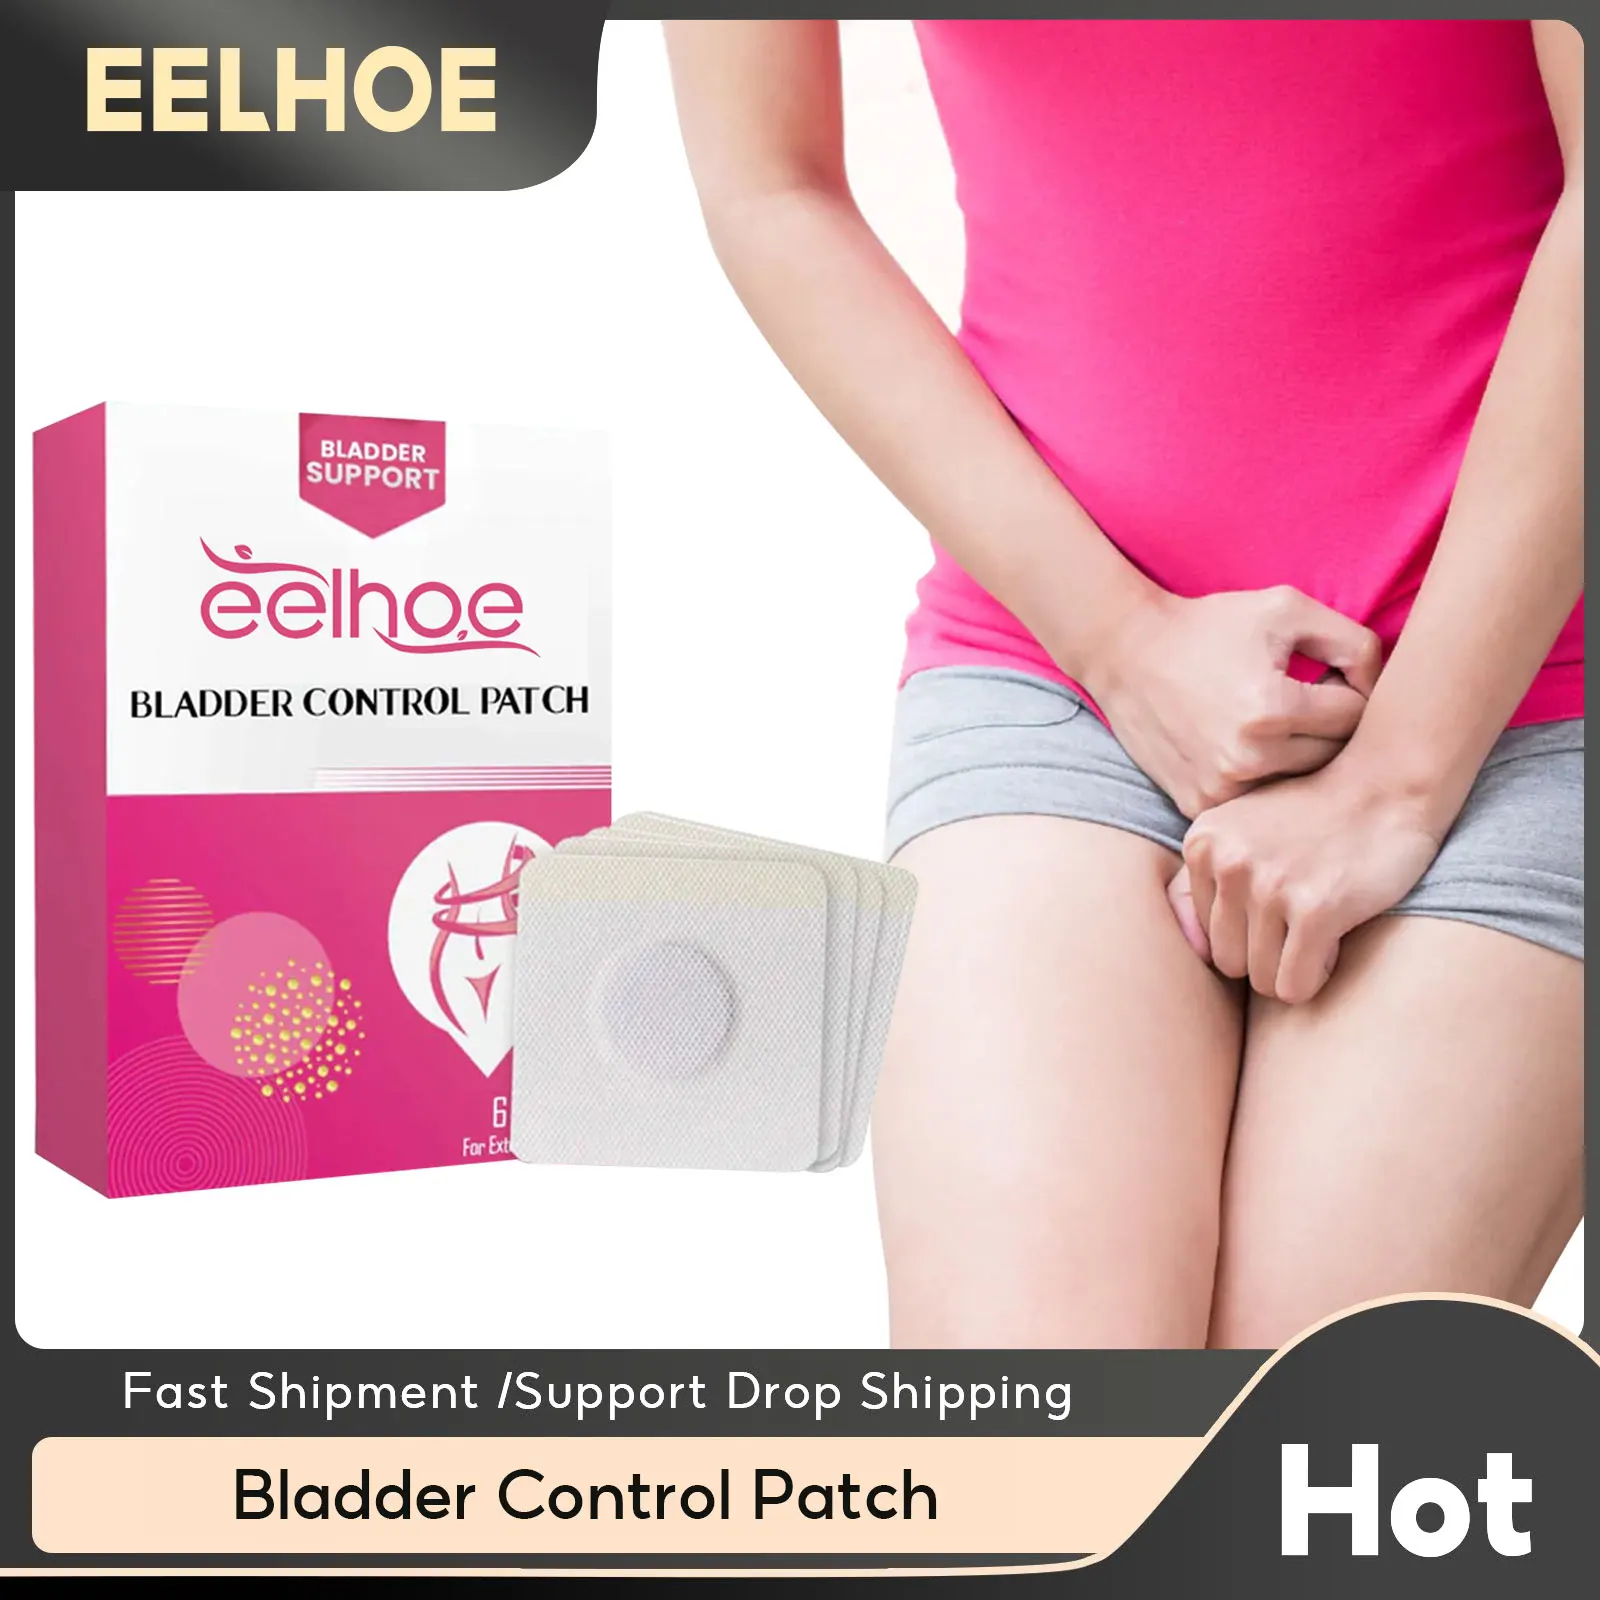 Urine Leakage Patches For Women Relieve Frequent Urinary Incontinence Herbs Chinese Medicines Profuse Urination Control Stickers urine leakage patches for women relieve frequent urinary incontinence herbs chinese medicines profuse urination control stickers